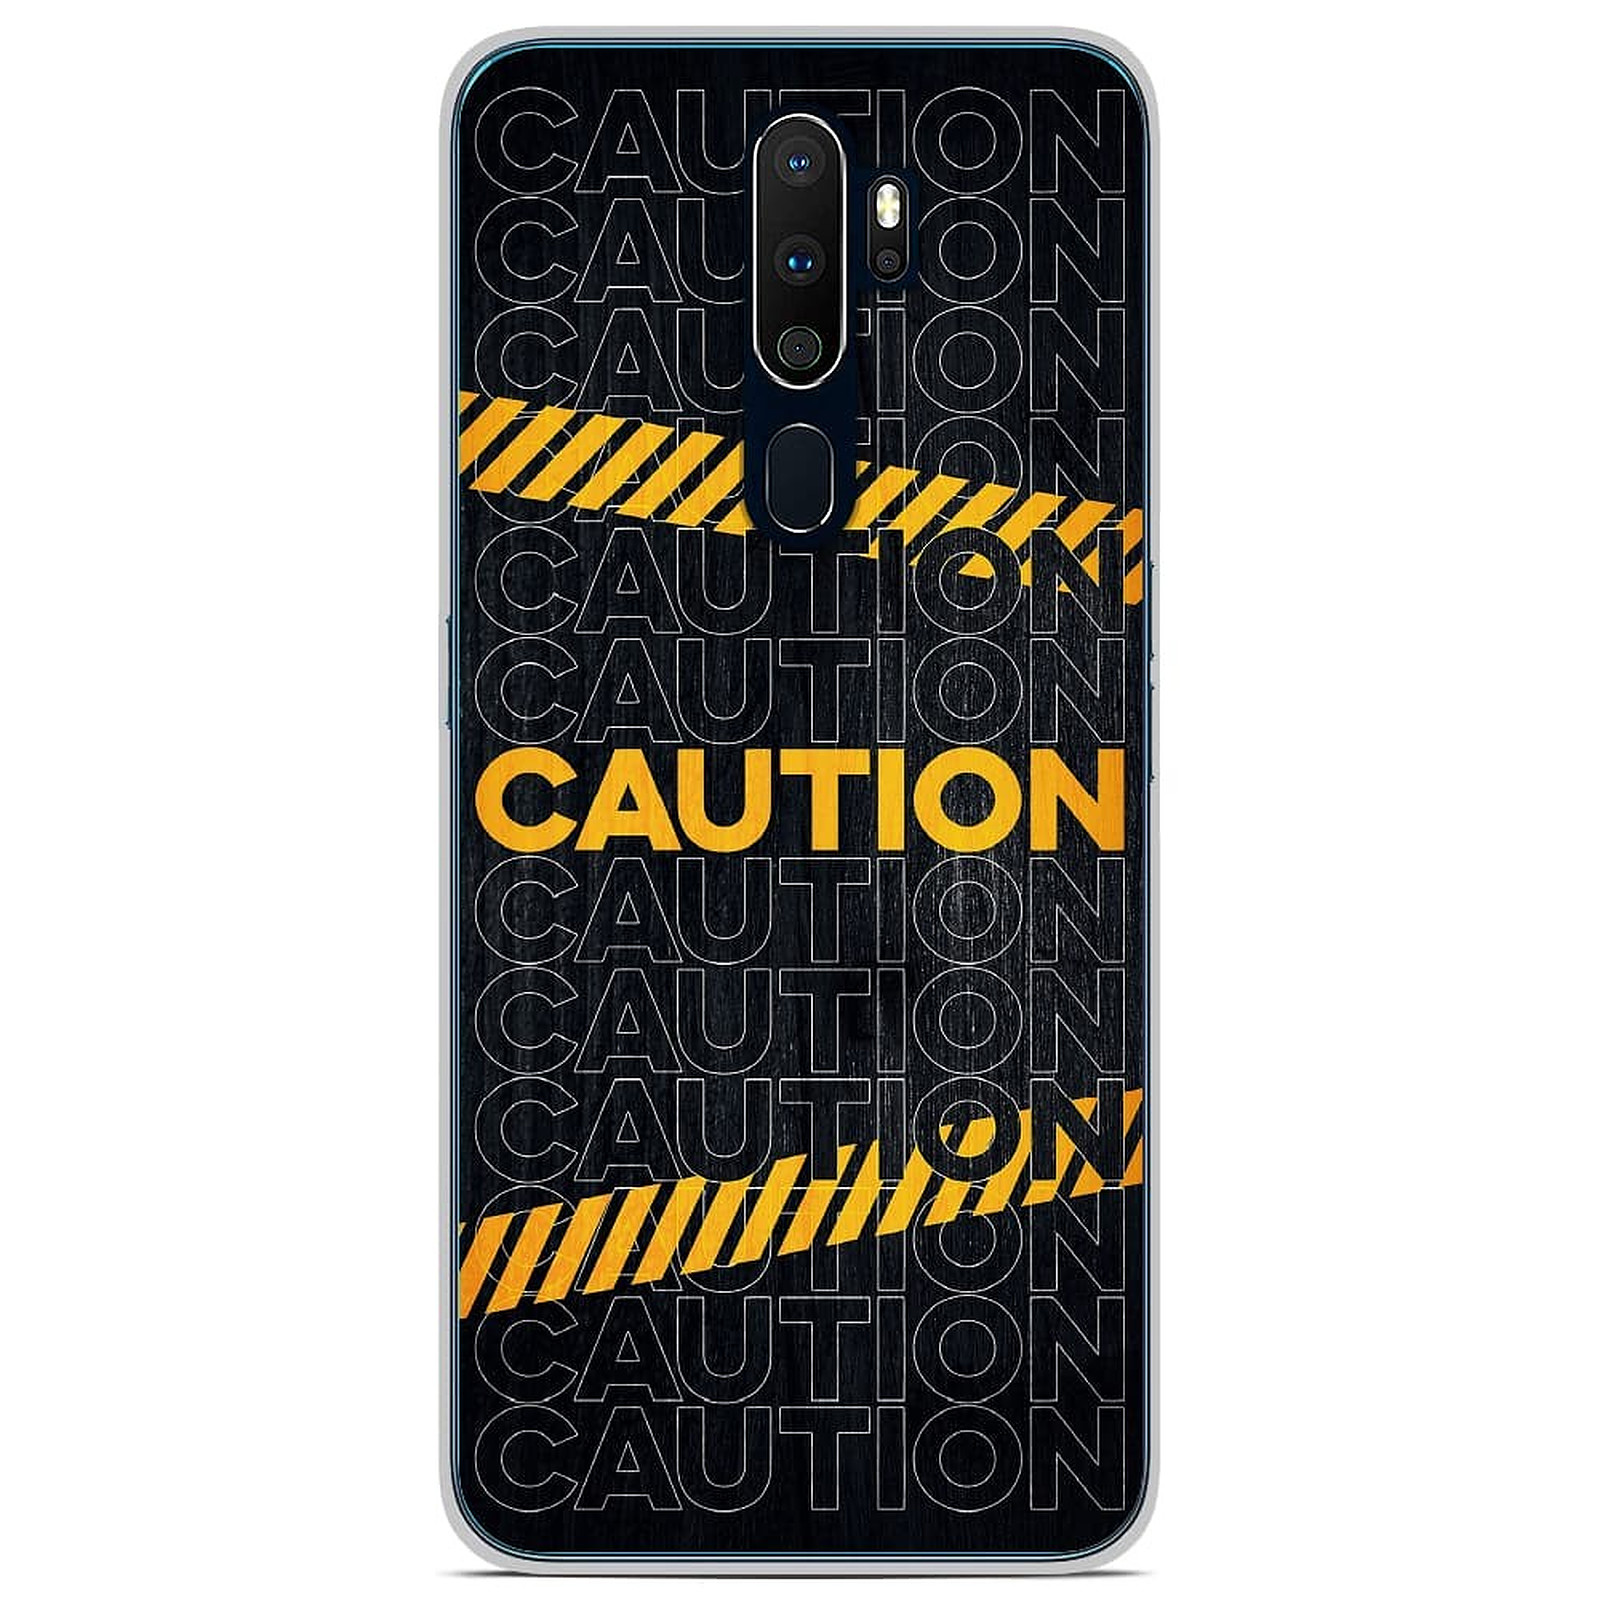 1001 Coques Coque silicone gel Oppo A9 2020 motif Caution - Coque telephone 1001Coques